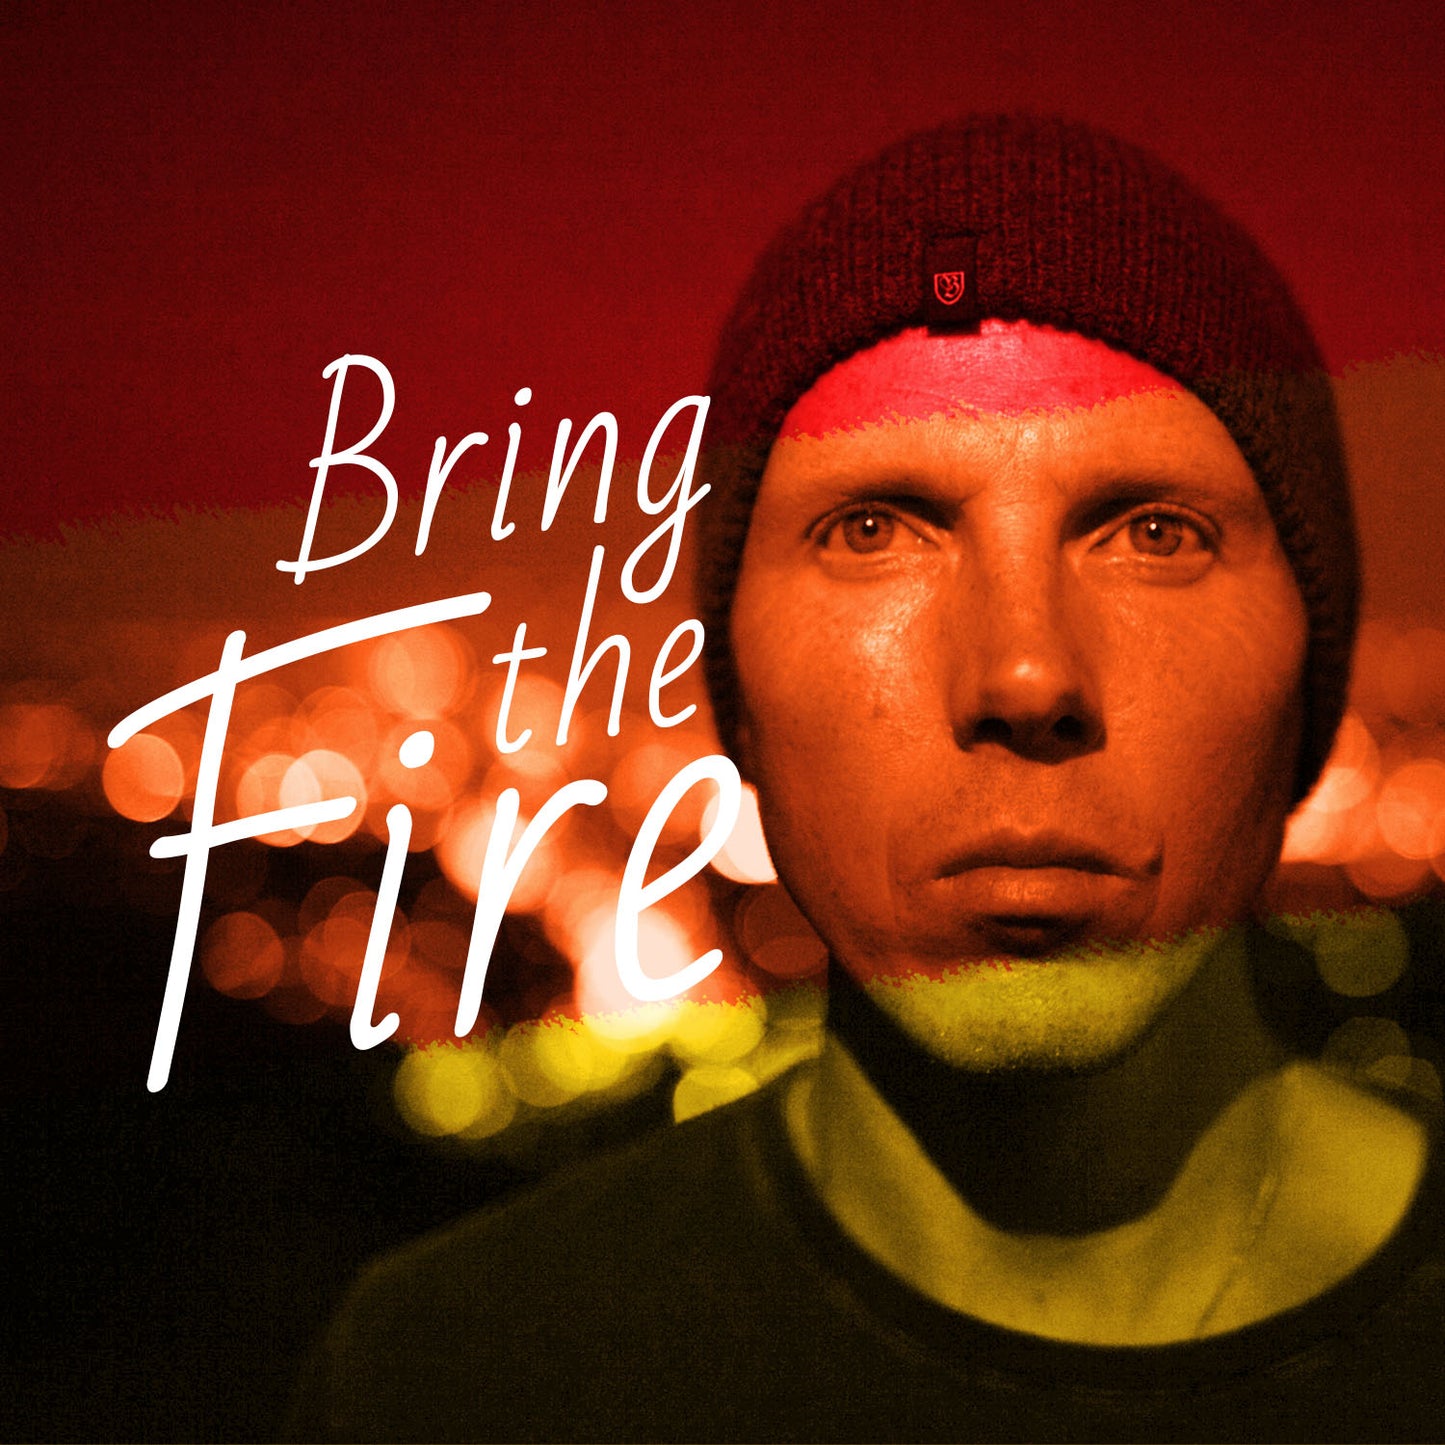 Bring The Fire